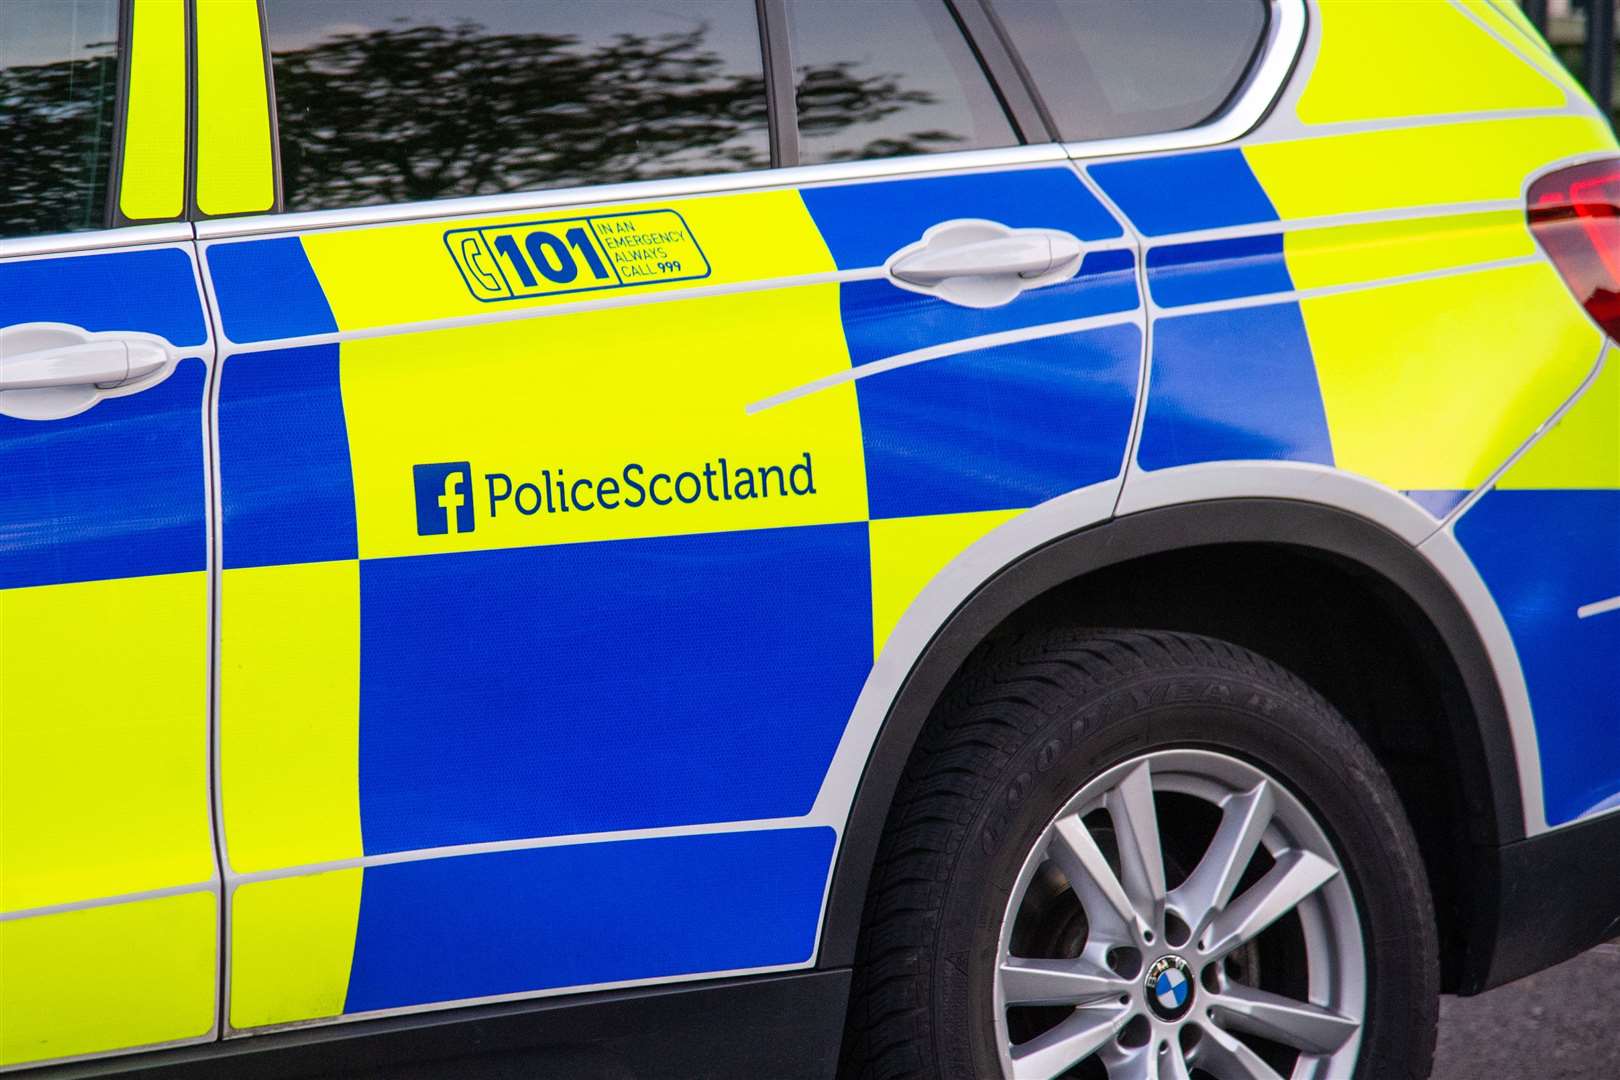 Police Scotland are targetting potential drink and drug drivers.